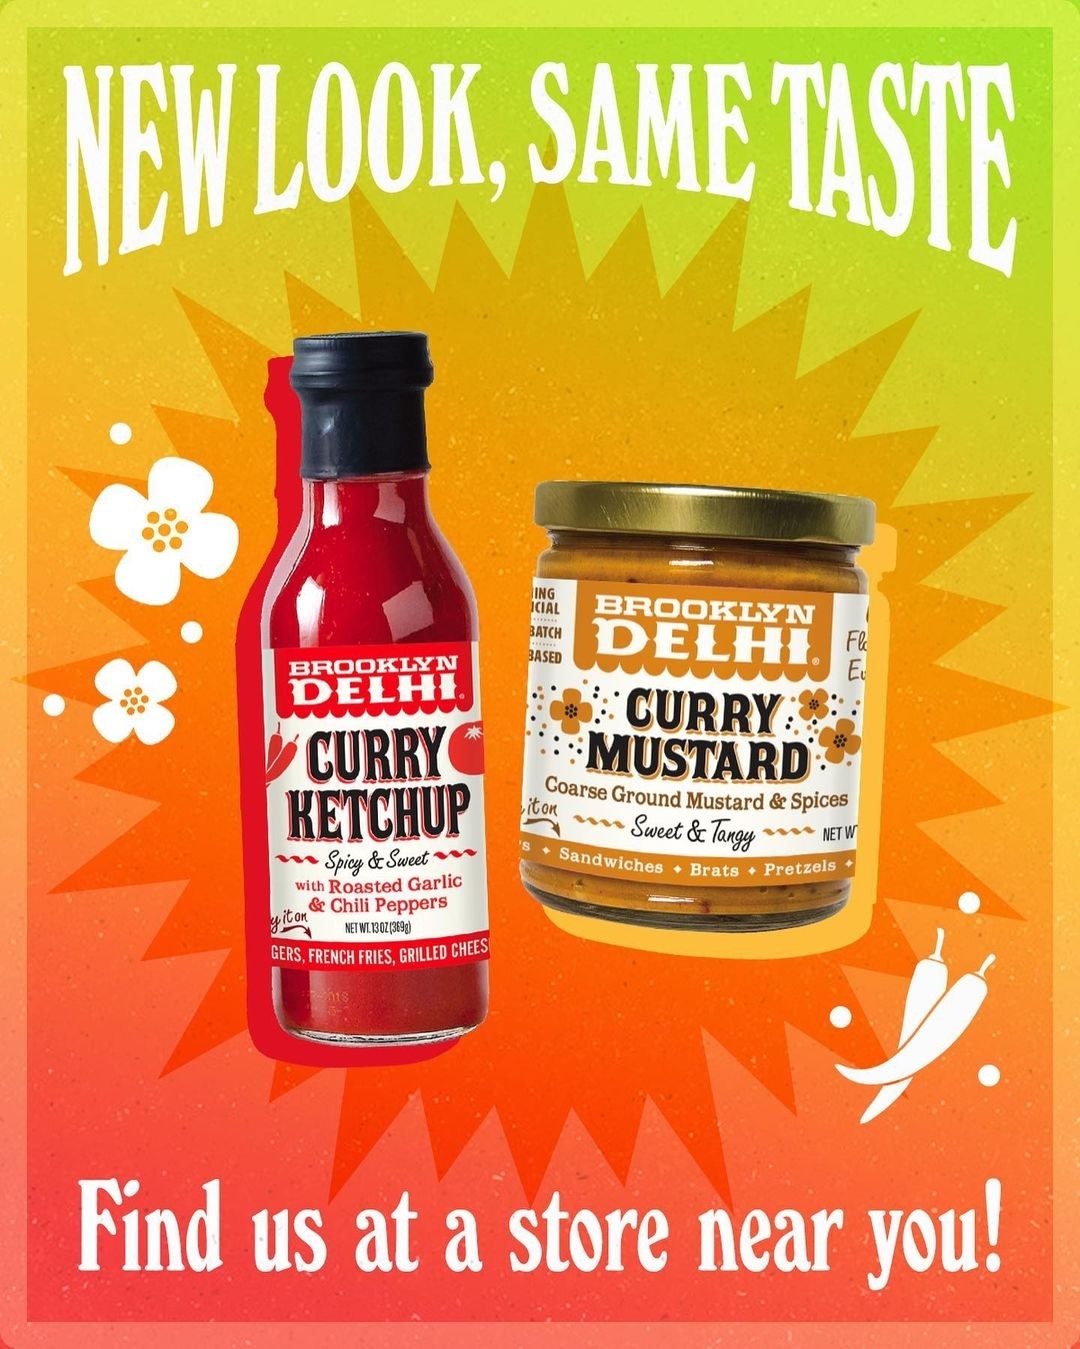 Curry ketchup and curry mustard from Brooklyn Delhi